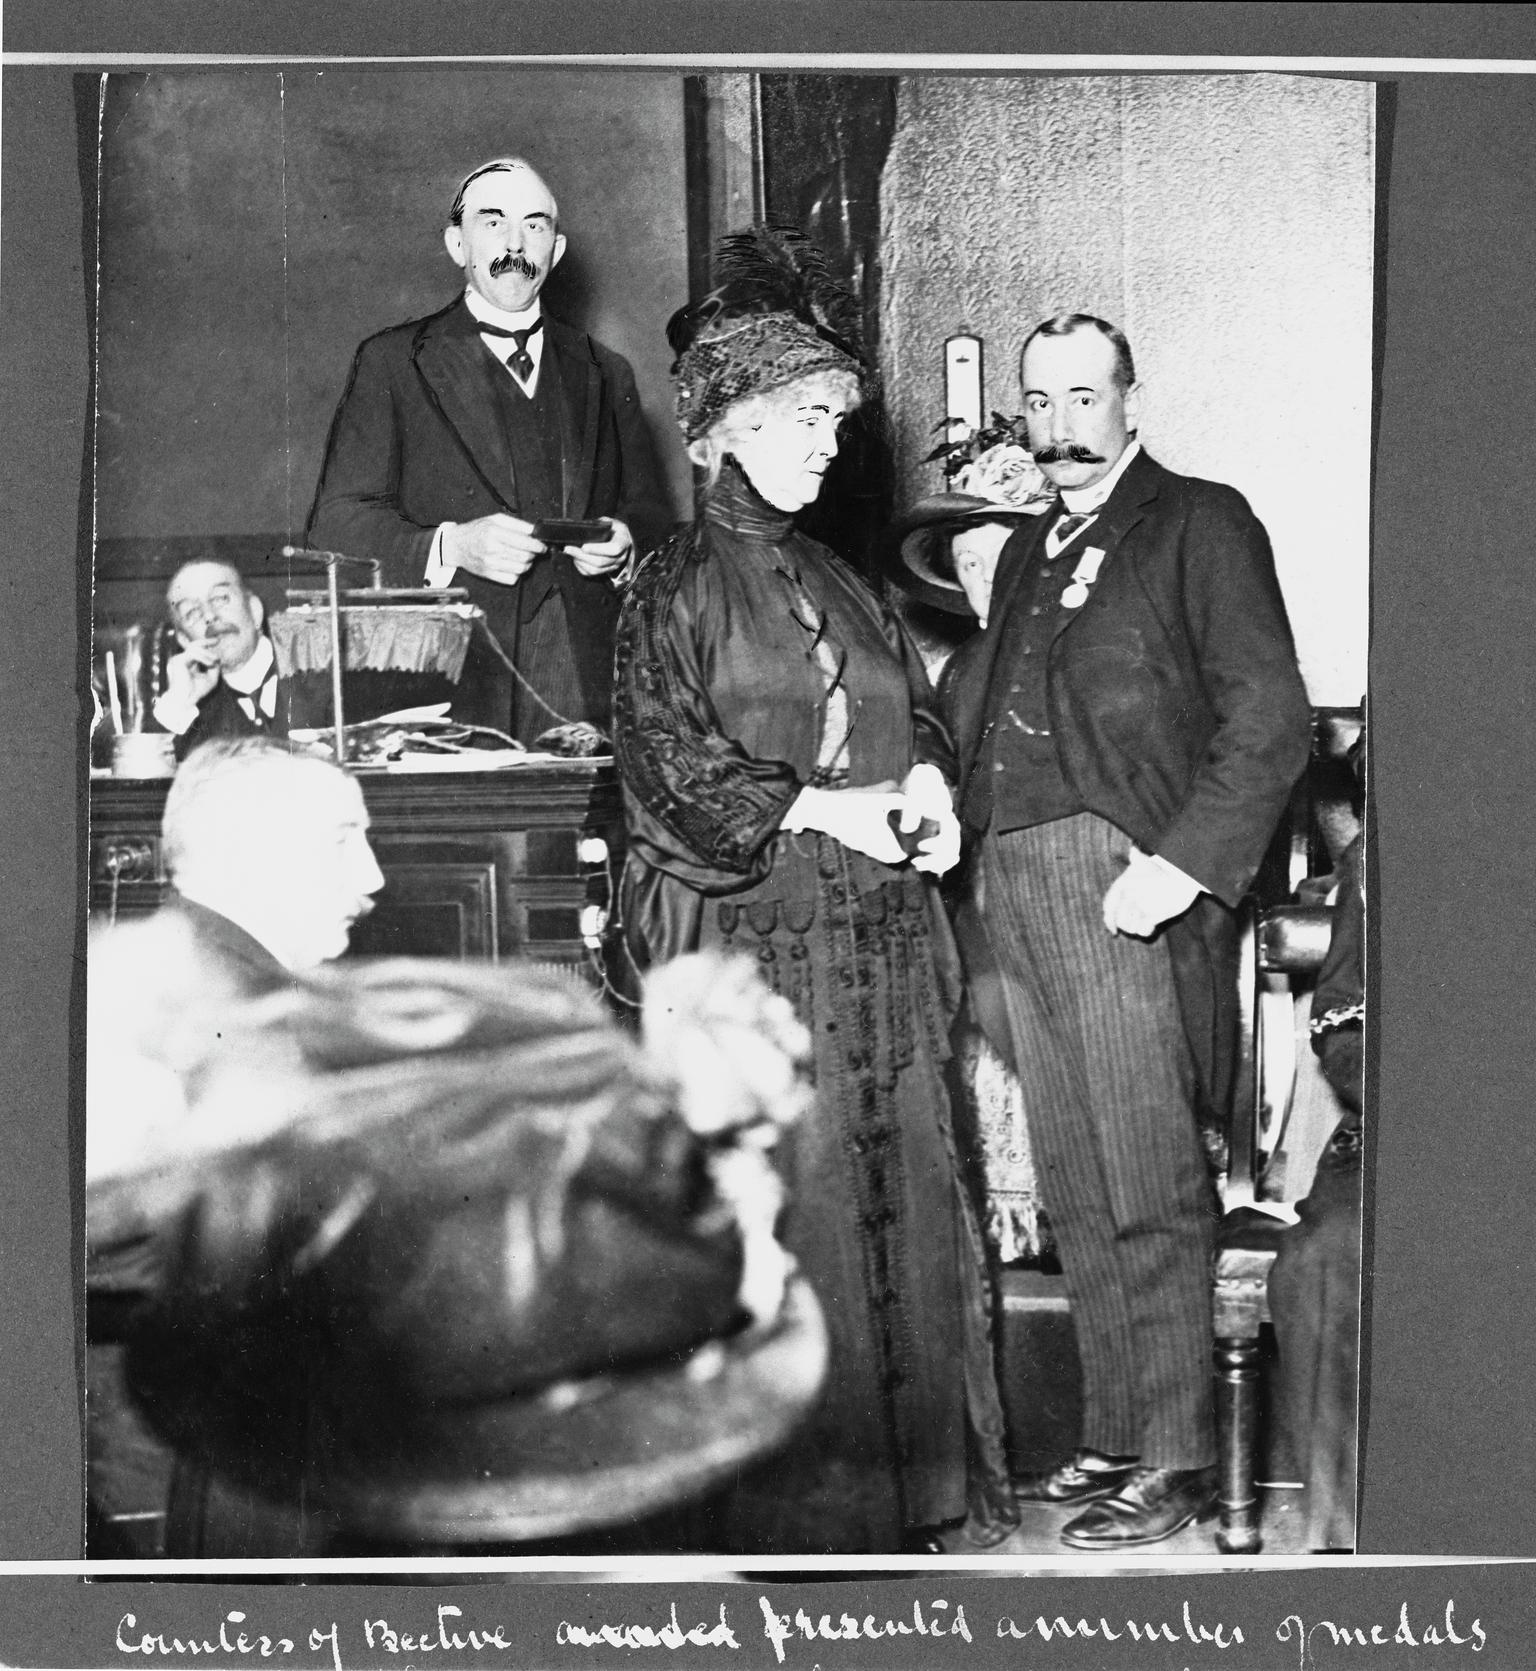 Countess of Bective presenting a medal, photograph